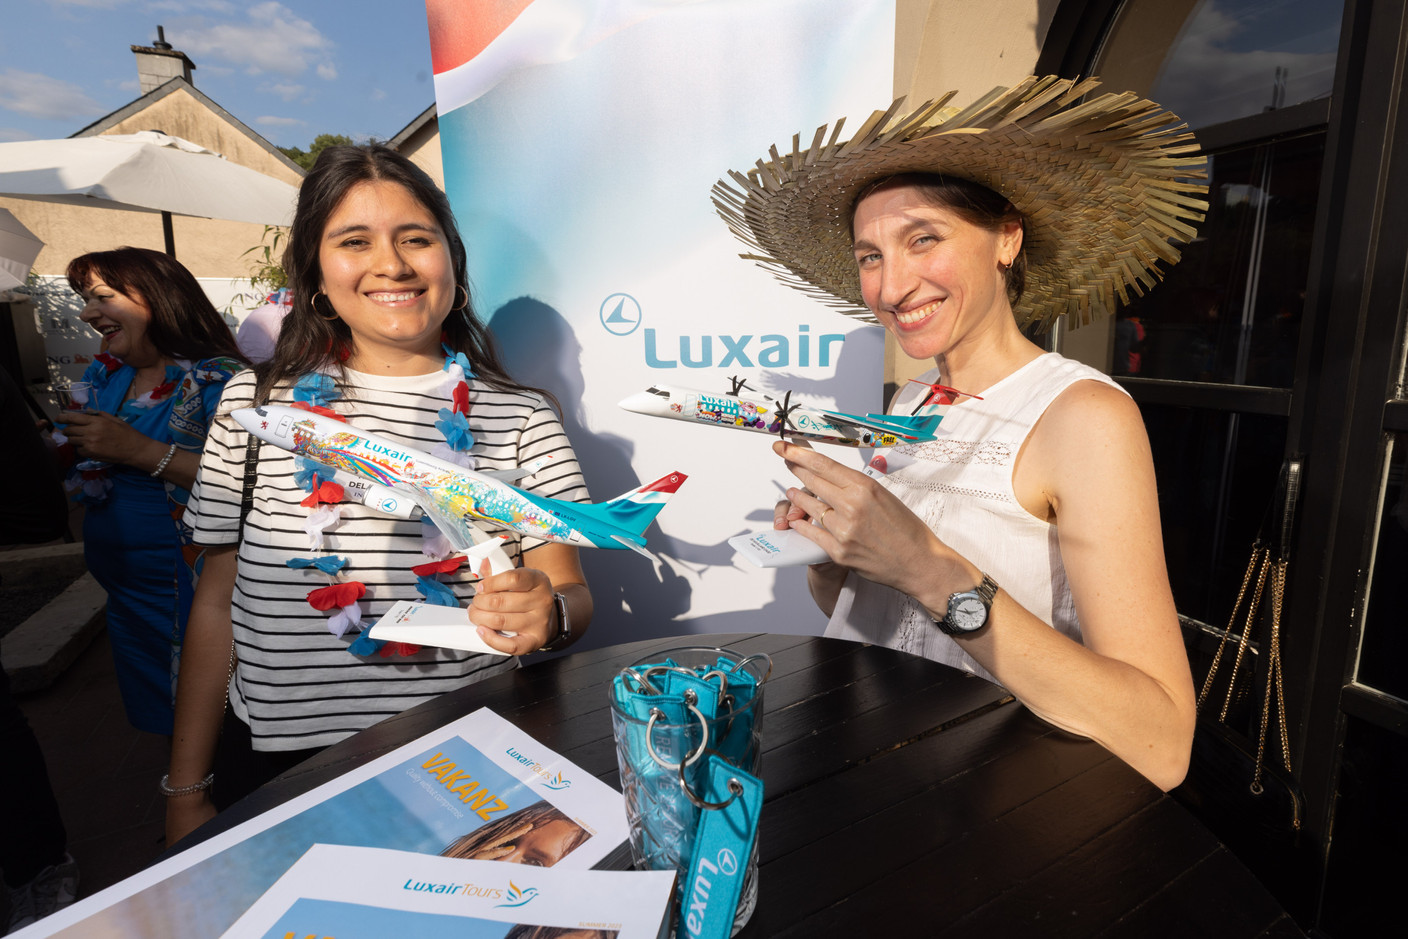 Firello Tosso and Cagla de Brem (Luxair). Photo: Guy Wolff/Maison Moderne